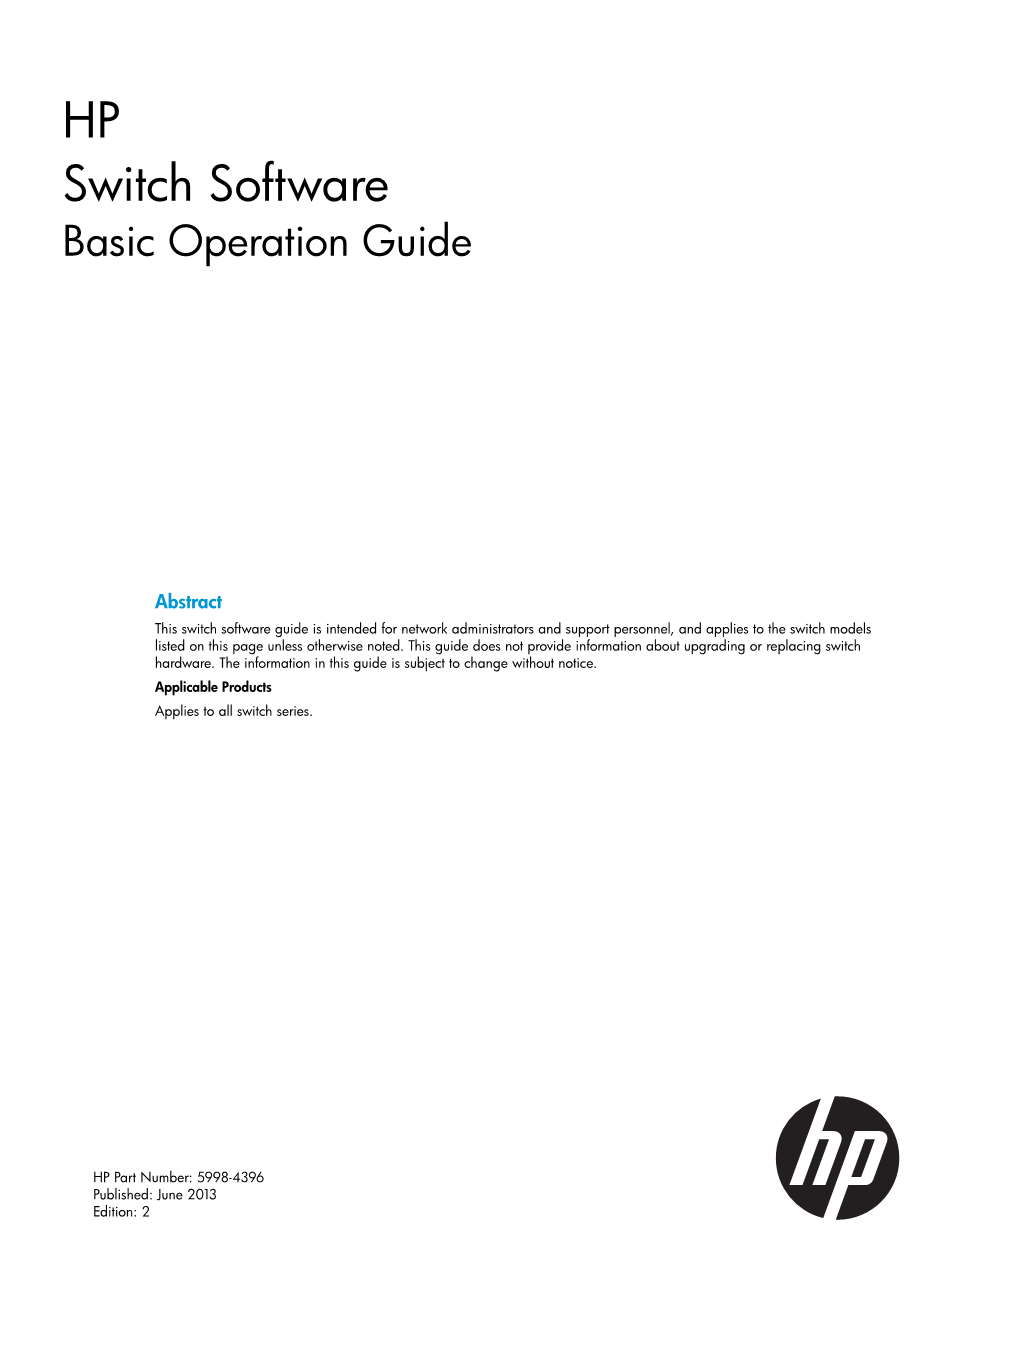 HP Switch Software Basic Operation Guide